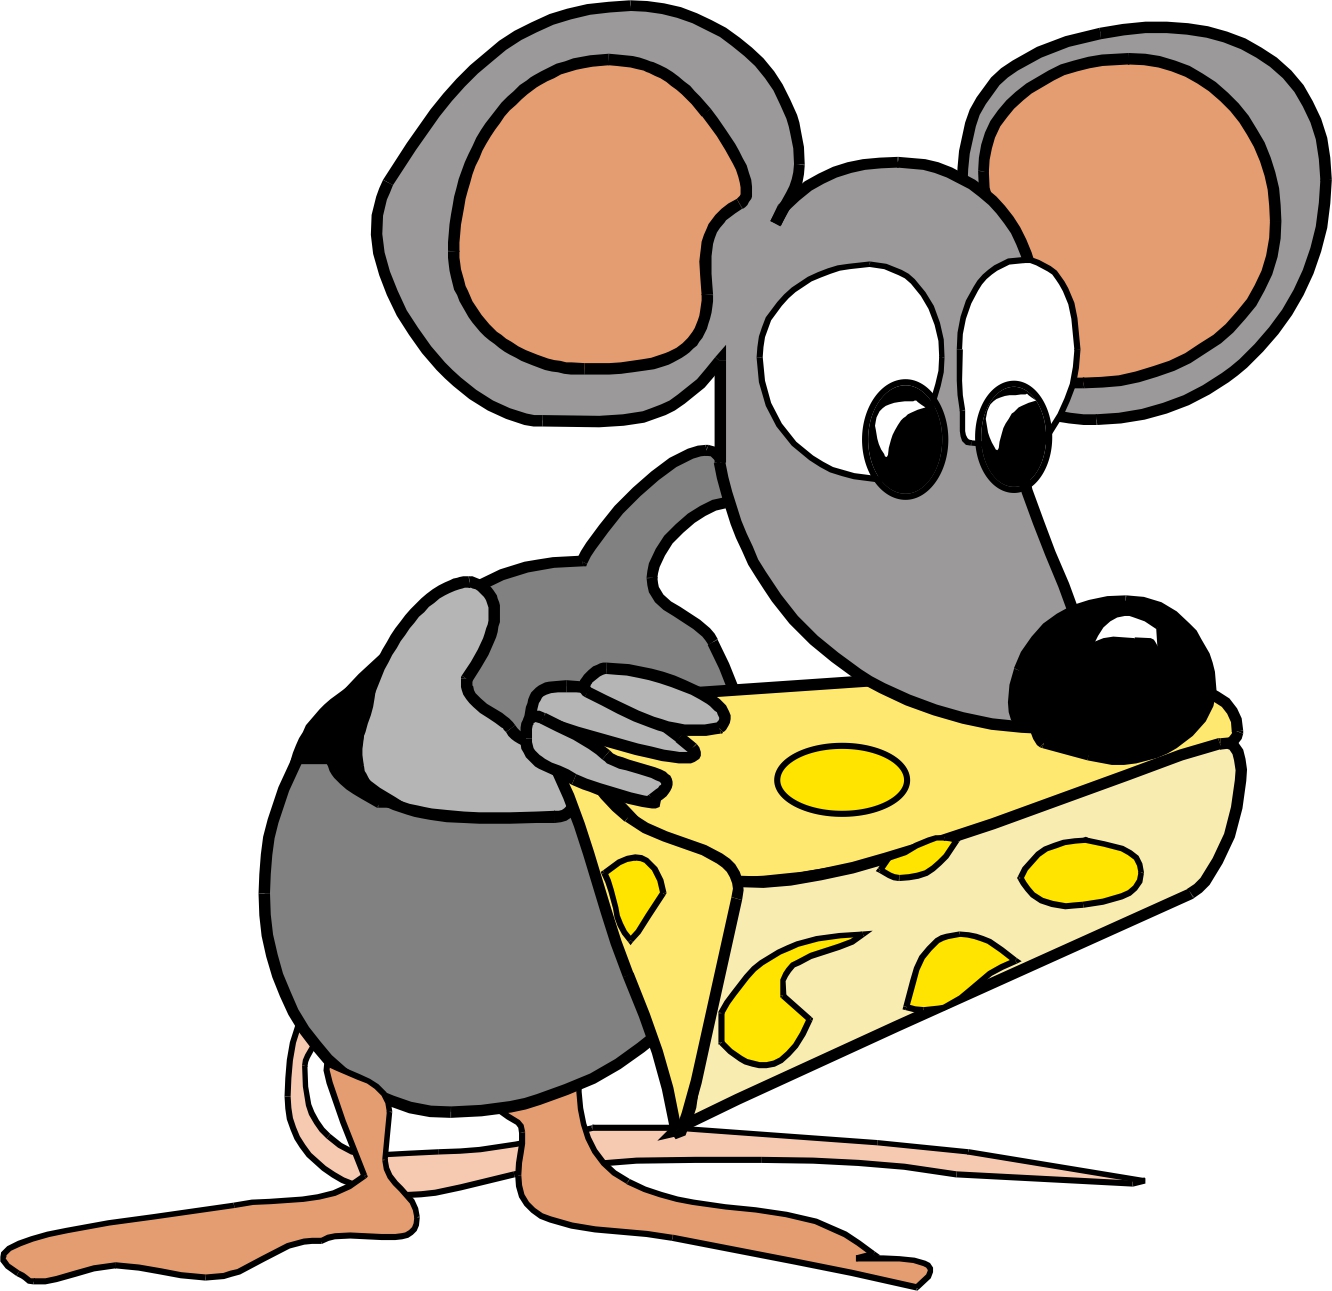 Cheese clipart mouse. Panda free images 